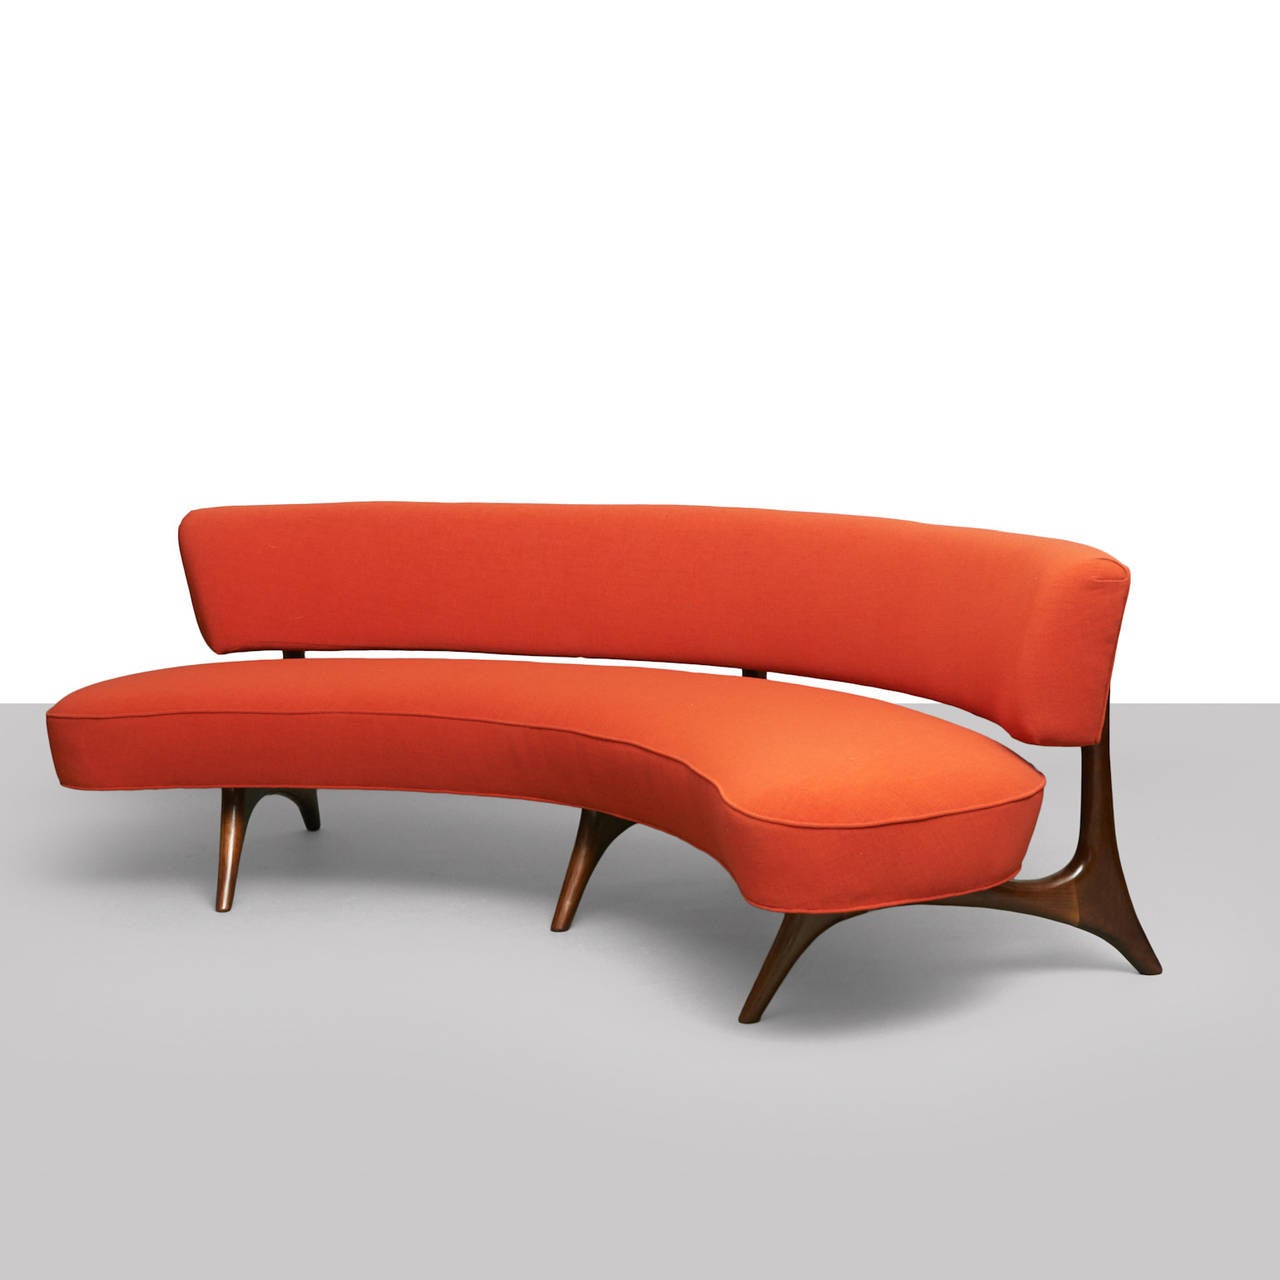 A sofa by Vladimir Kagan in a poppy colored upholstery and walnut frame.
Literature: 